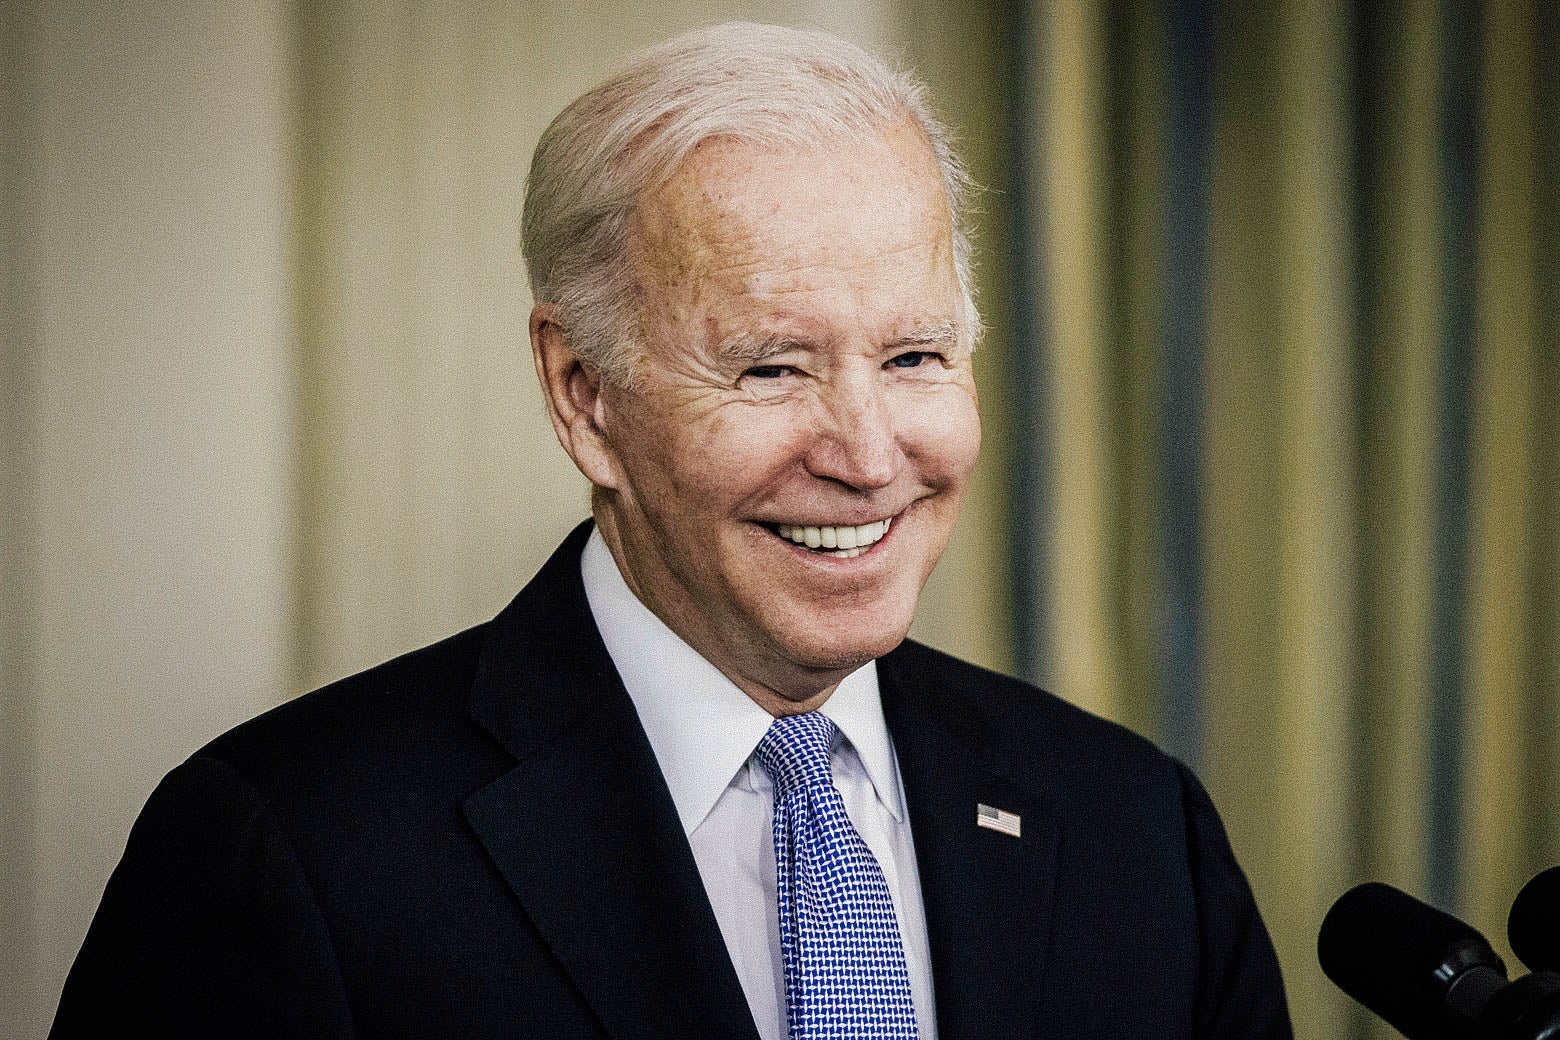 Biden smiles while standing at a podium behind a microphone.